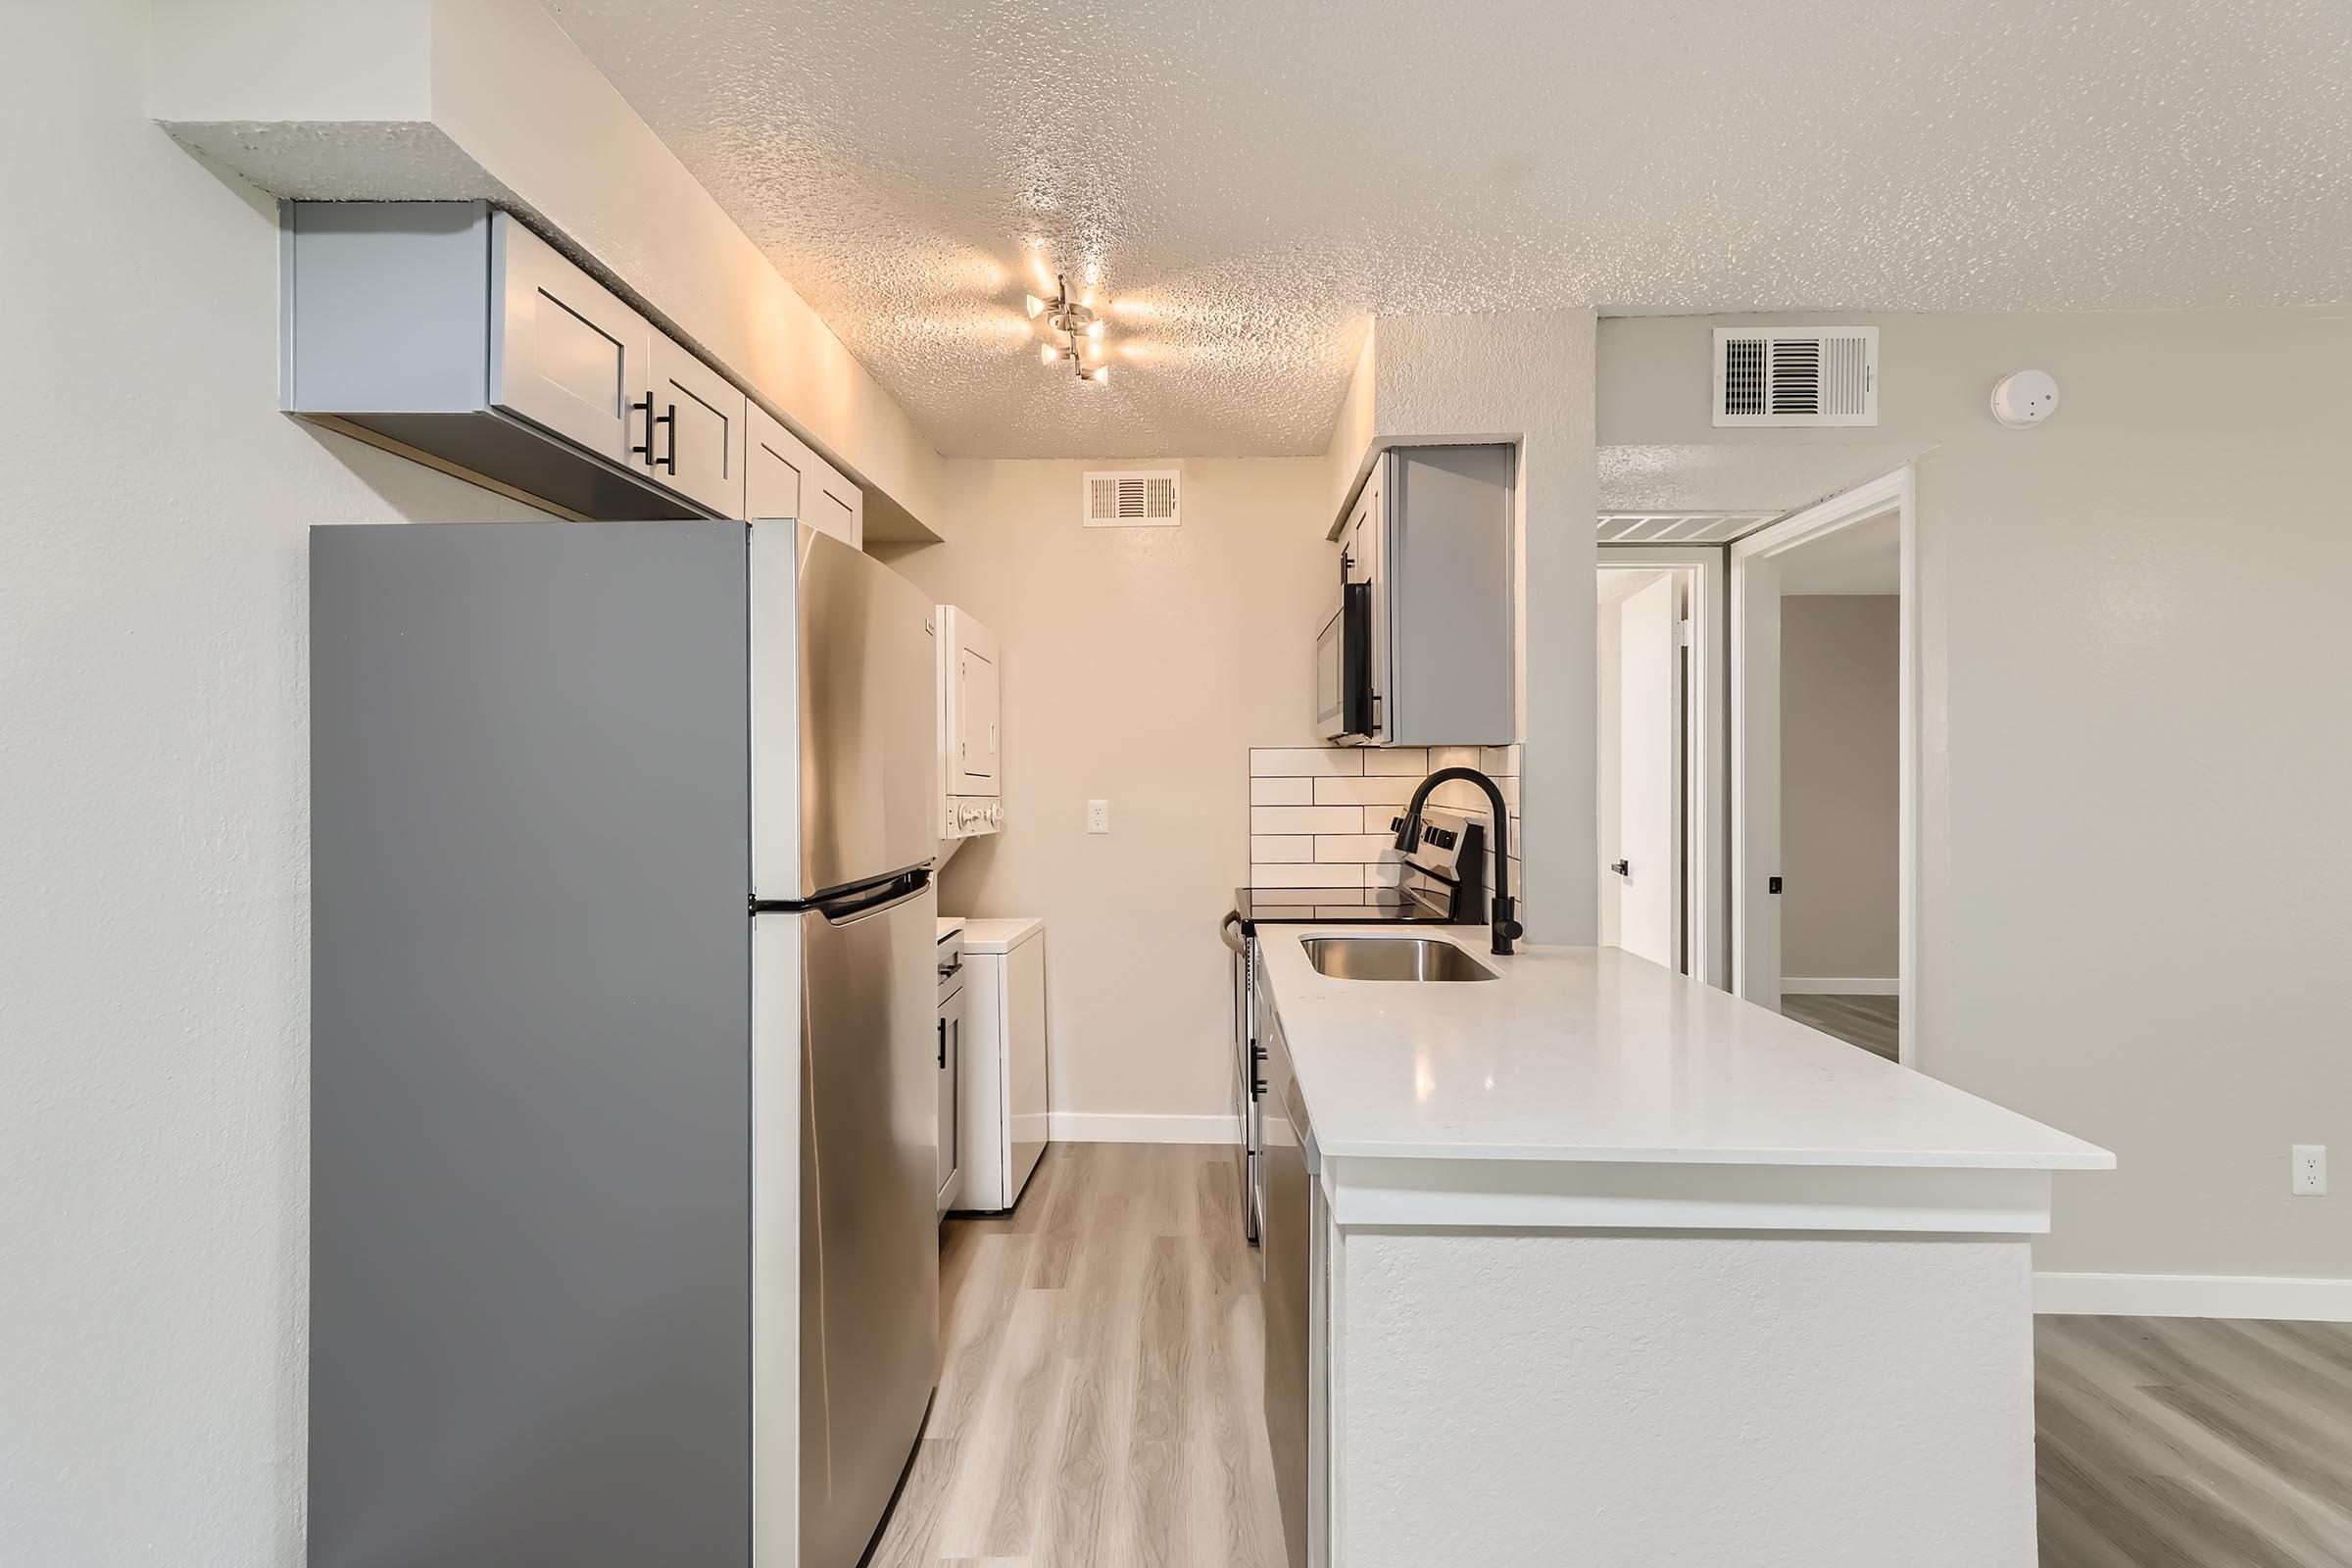 A remodeled kitchen with quartz countertops and stainless steel appliances at Rise Oak Creek.